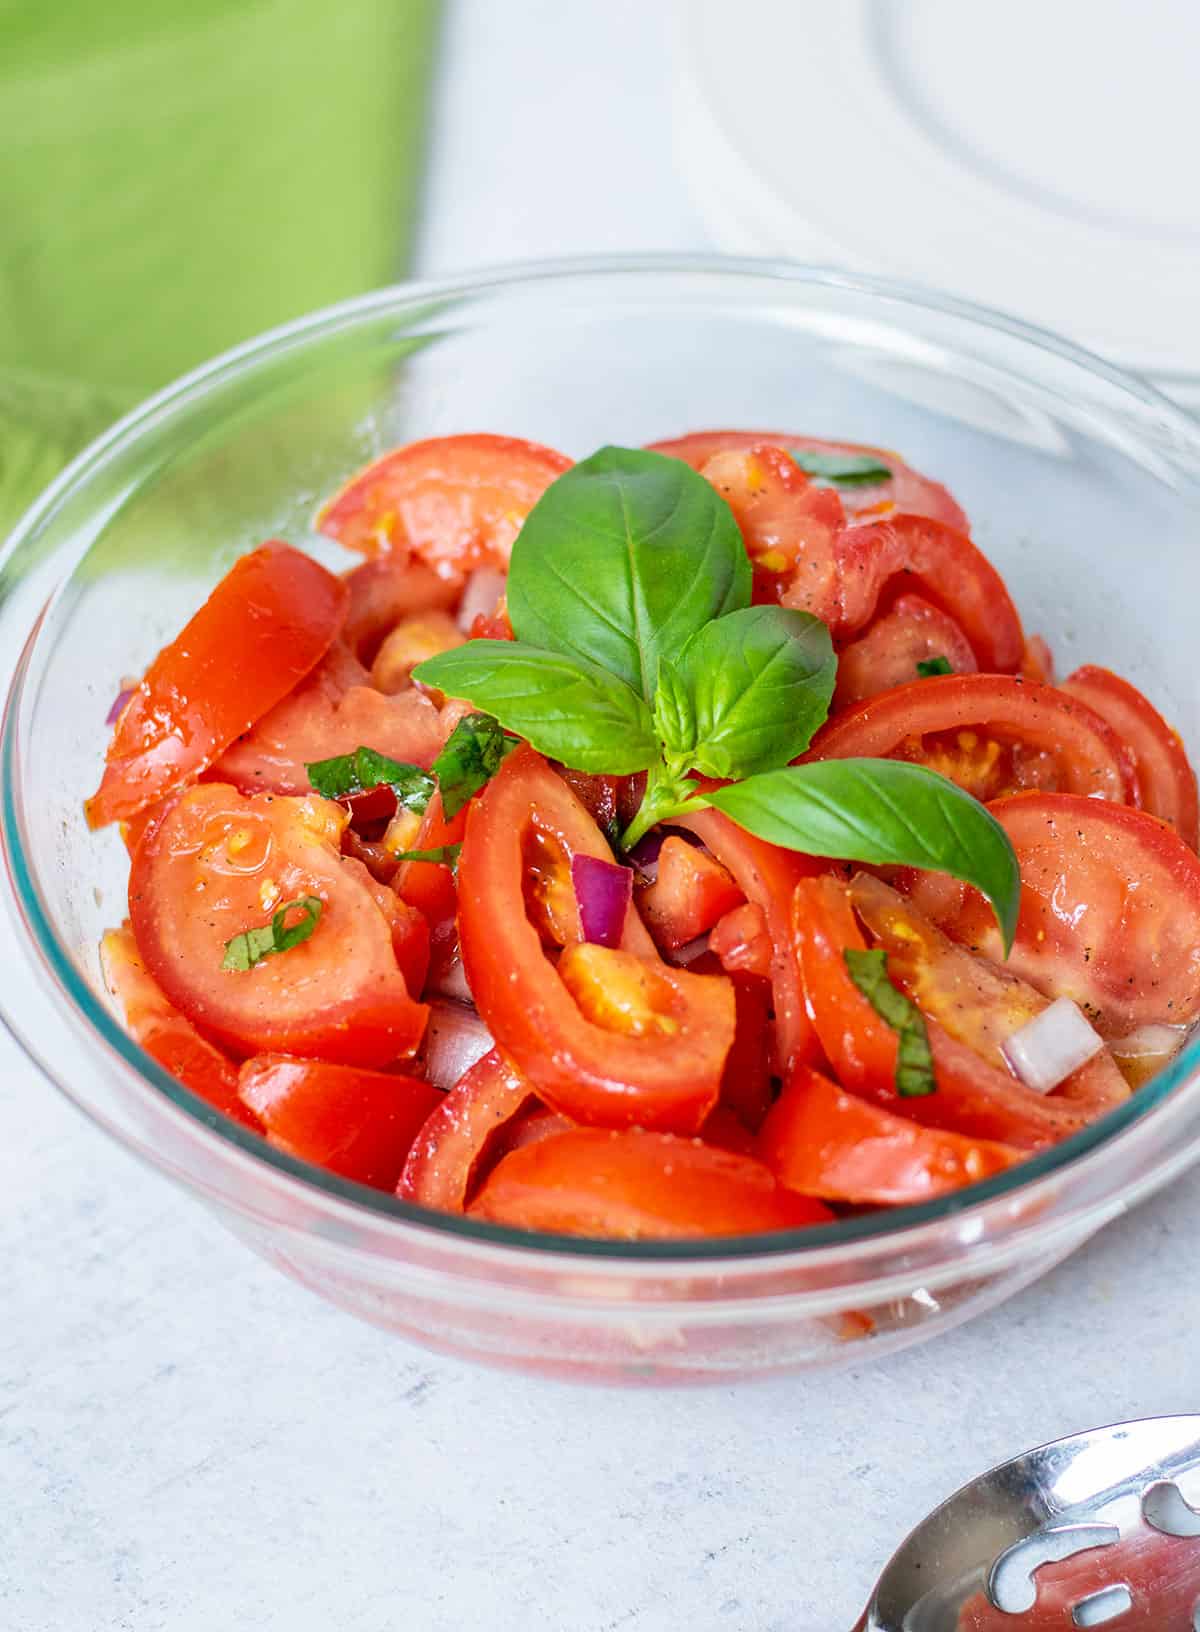 Prepared tomato salad in a glass bowl with basil on top.